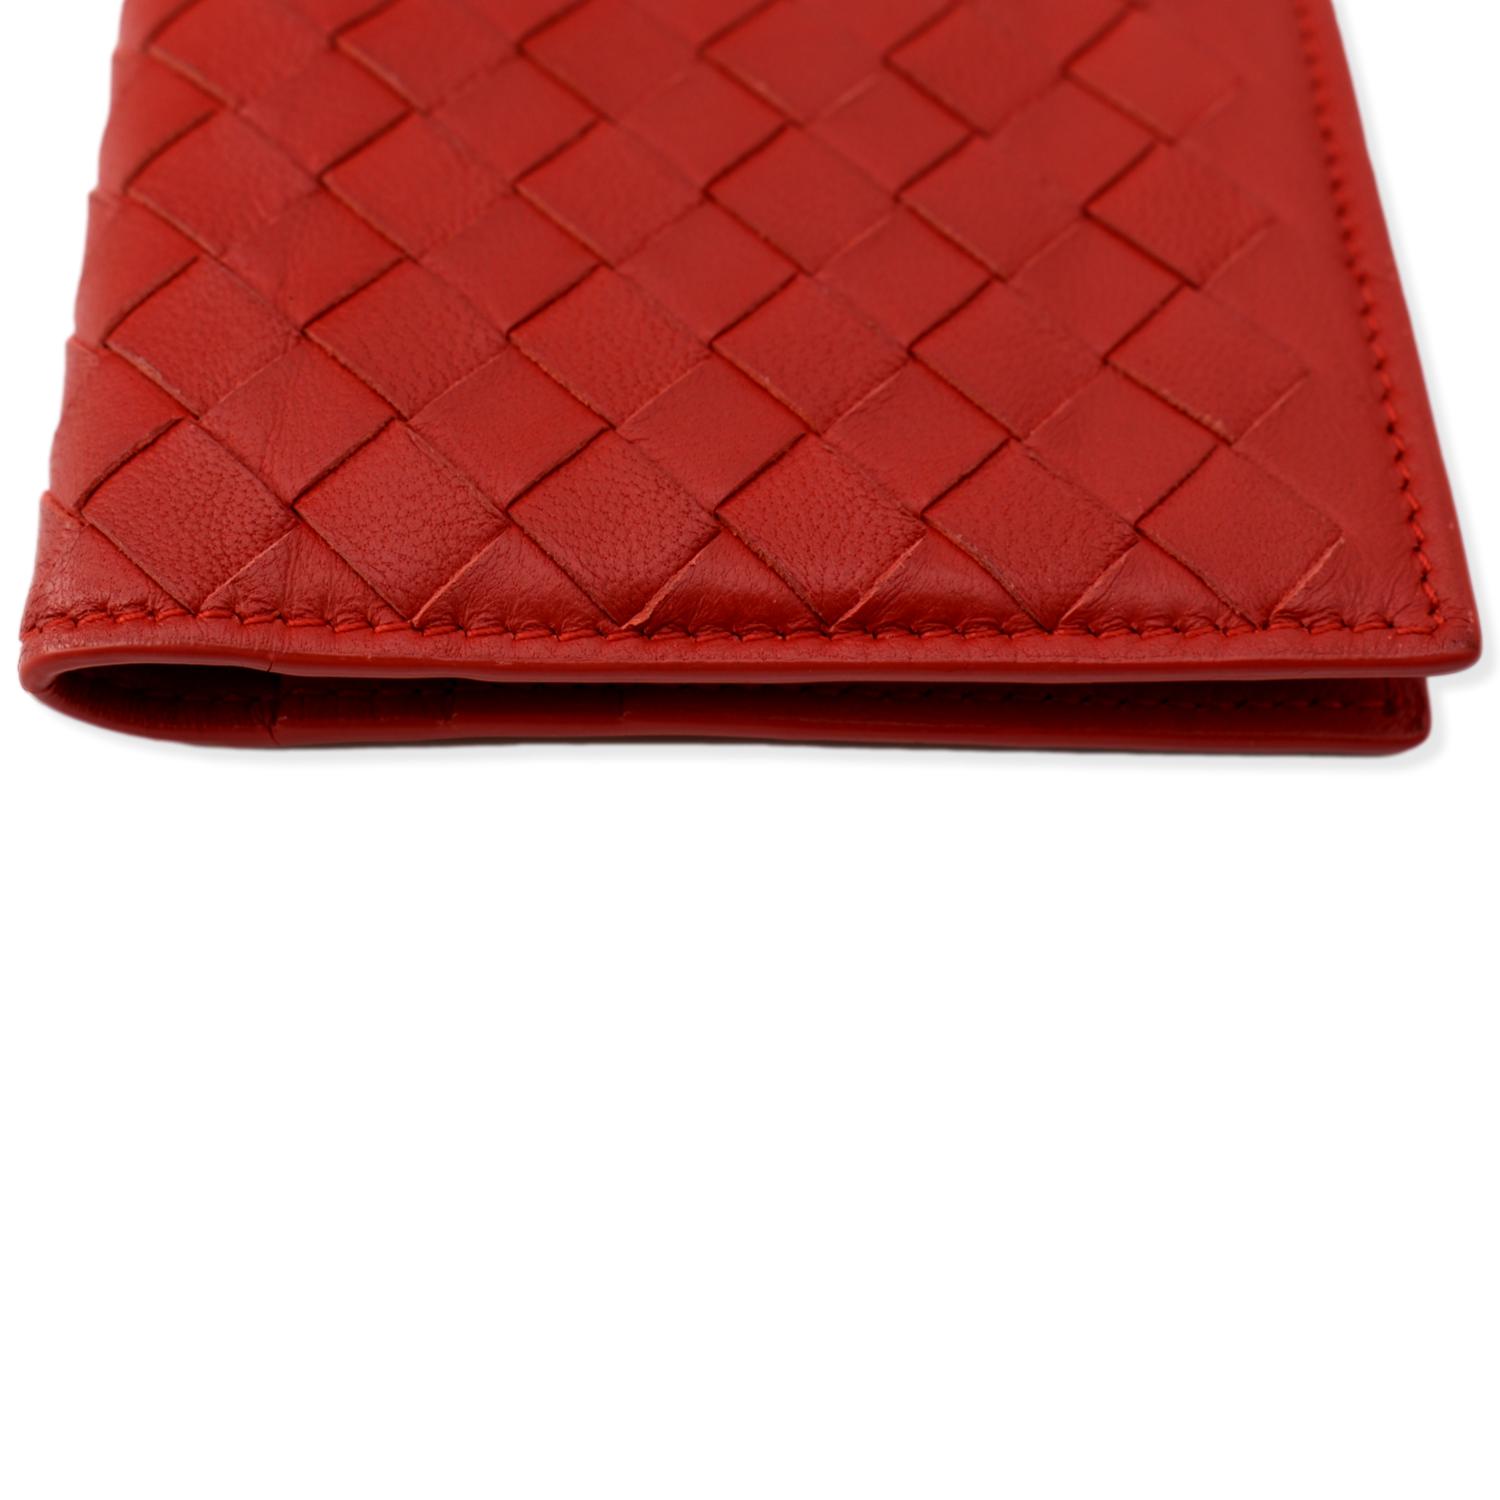 Wallets & purses Dolce & Gabbana - Solid leather bifold wallet